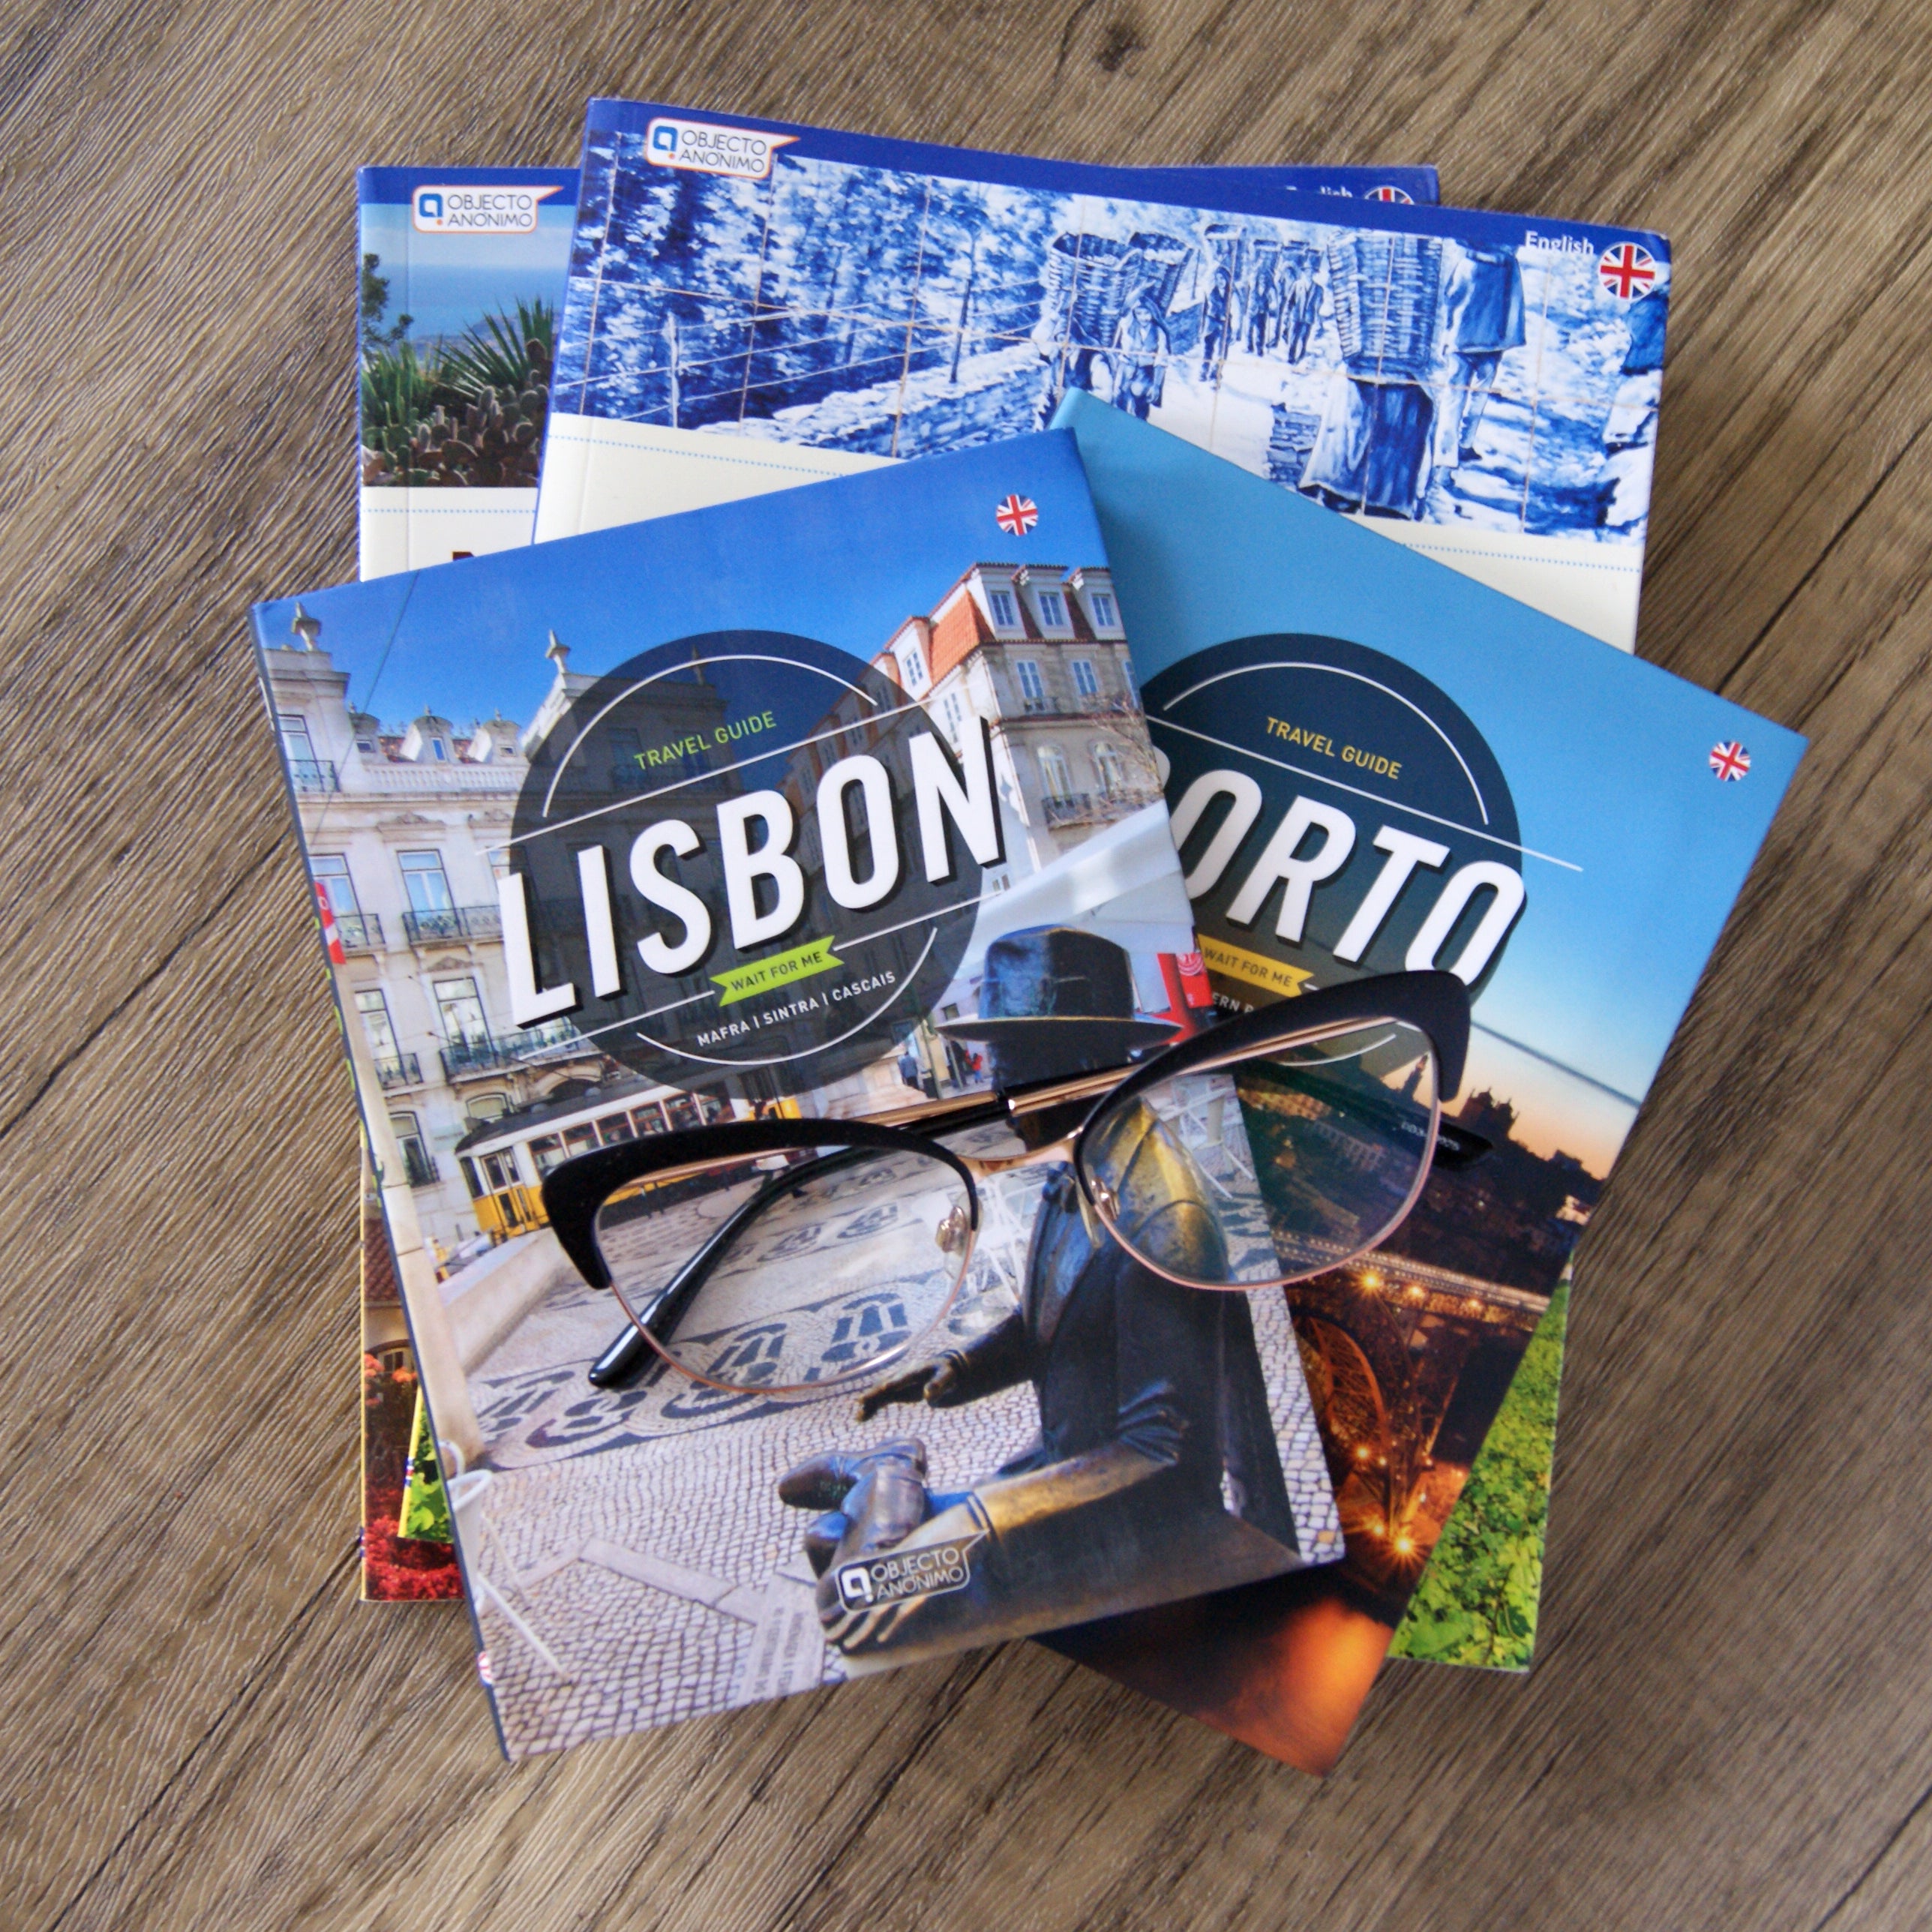 Cookbooks and travel guides written in Portugal and translated to english.